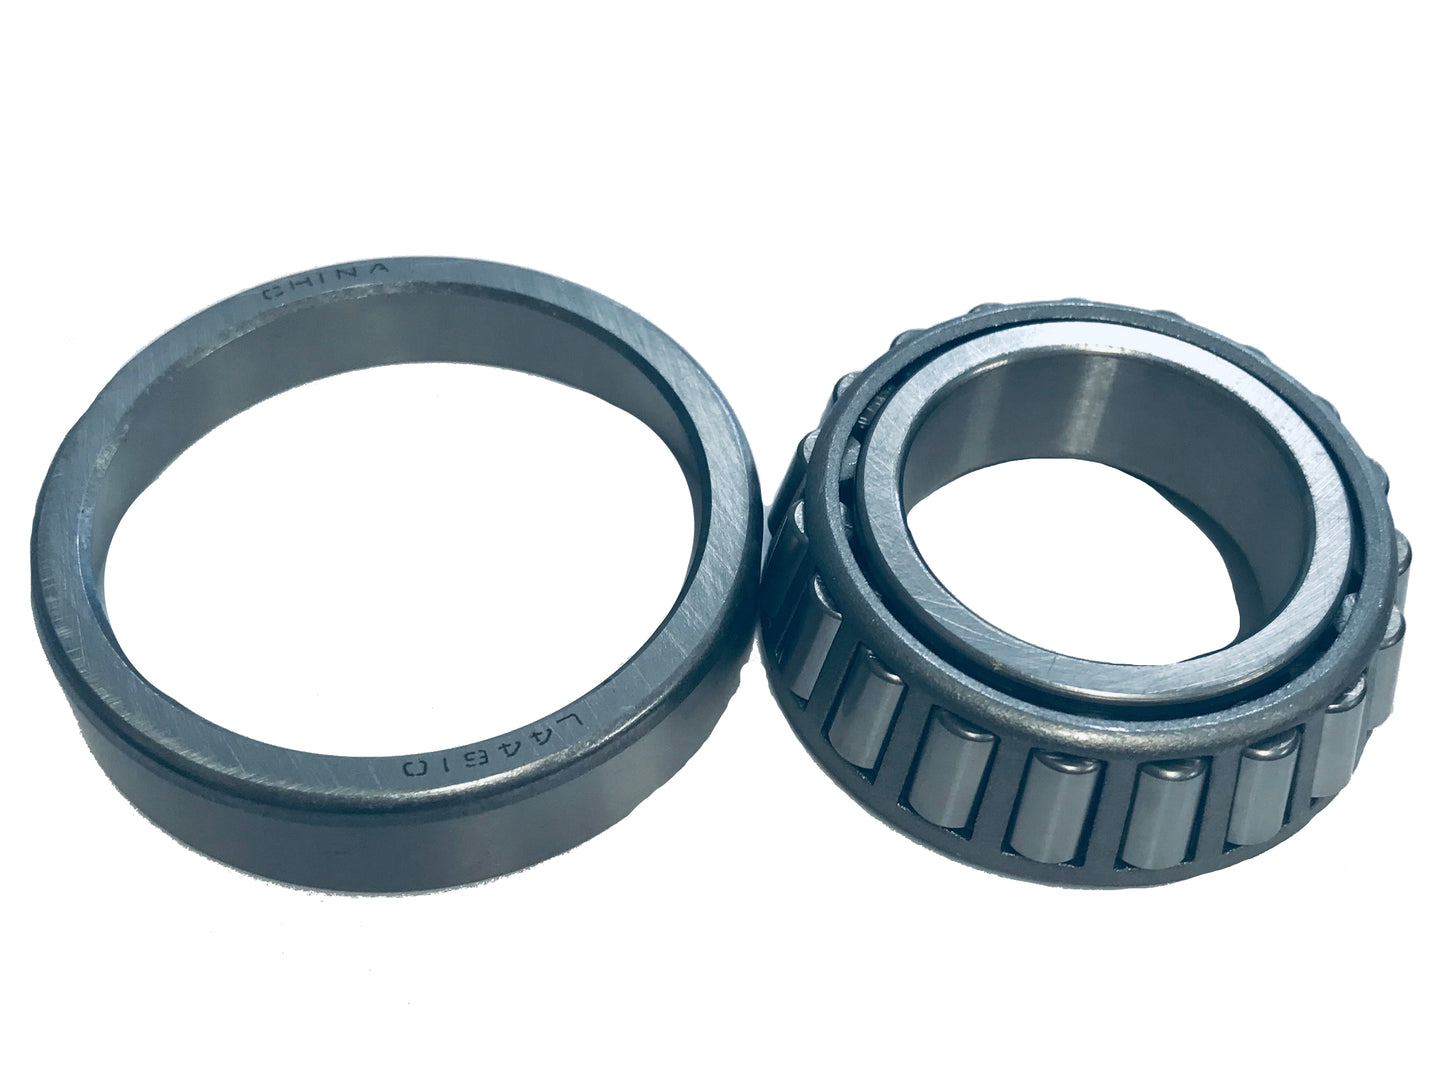 A&I Products Caster Yokes Roller Bearing - B1DC23,1